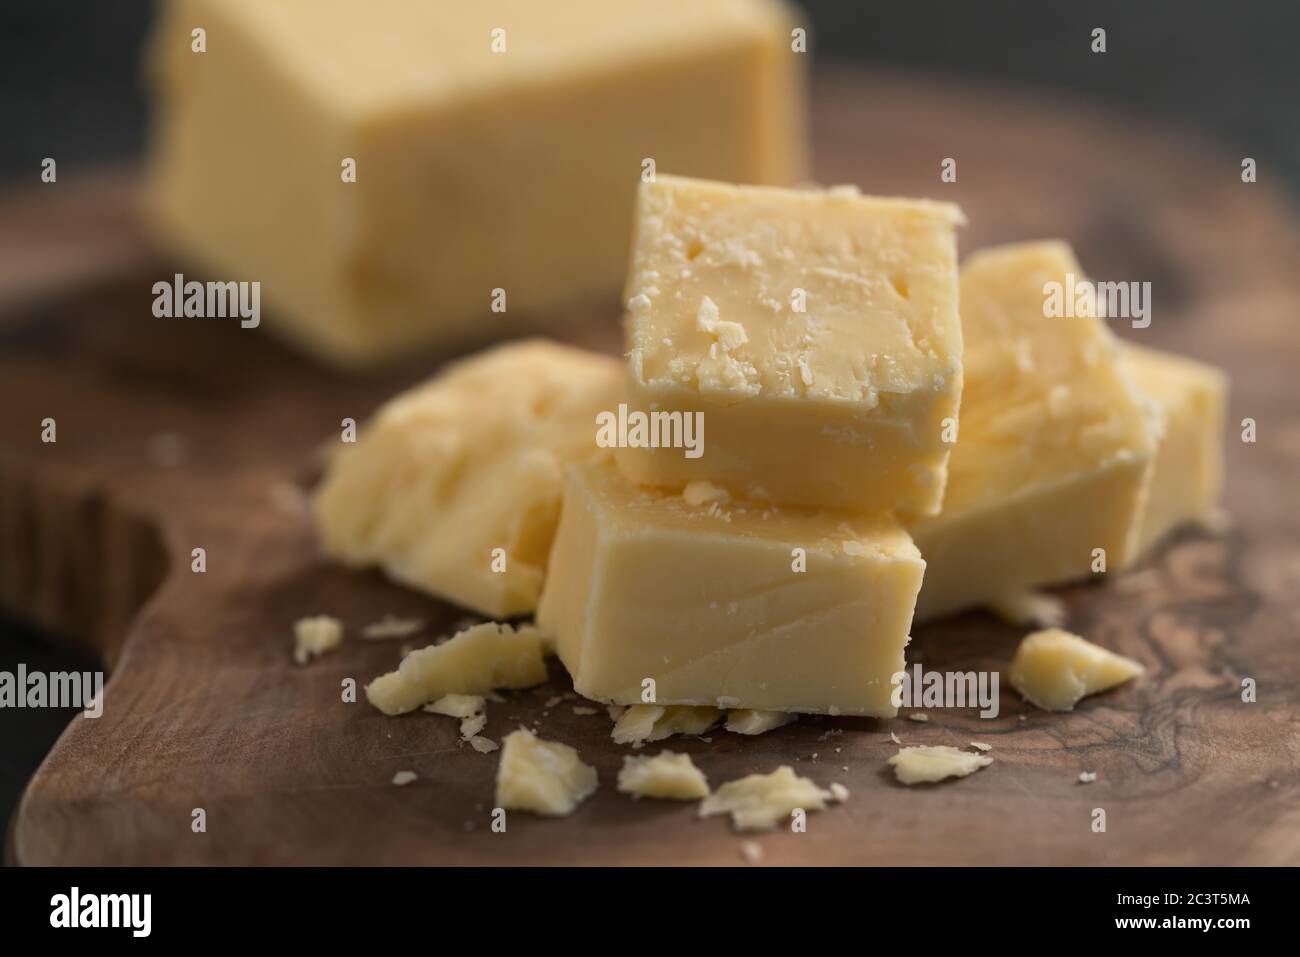 White cheddar cheese pieces on olive wood board Stock Photo